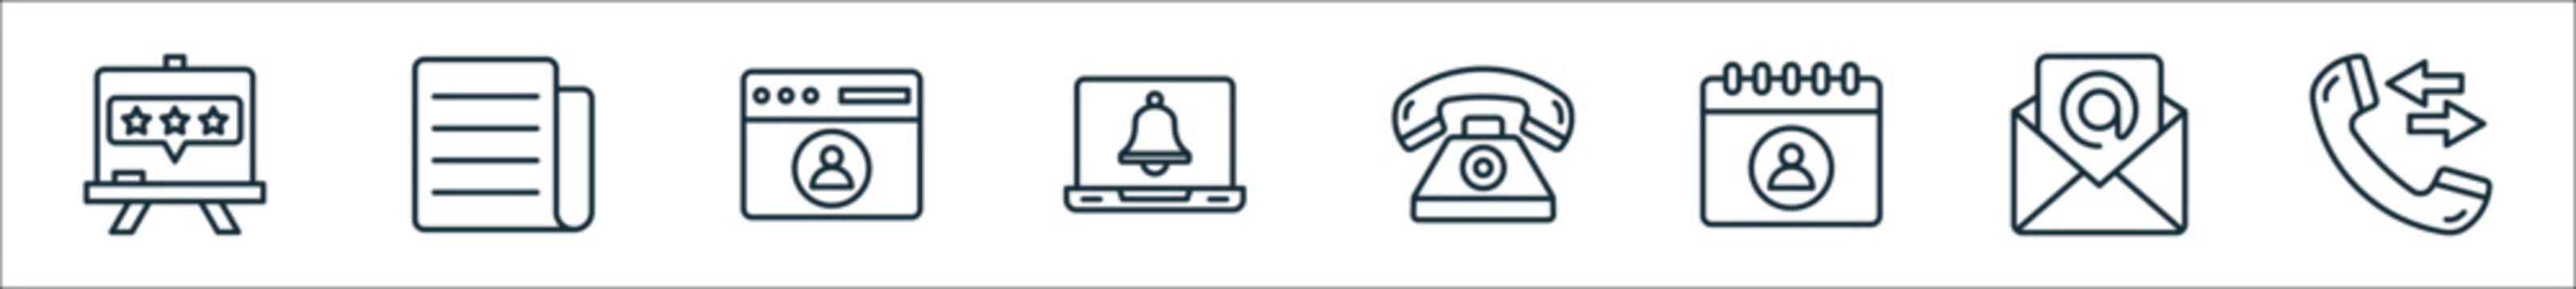 outline set of contact us line icons. linear vector icons such as rating, document, user, notification bell, telephone, user, mail, phone message